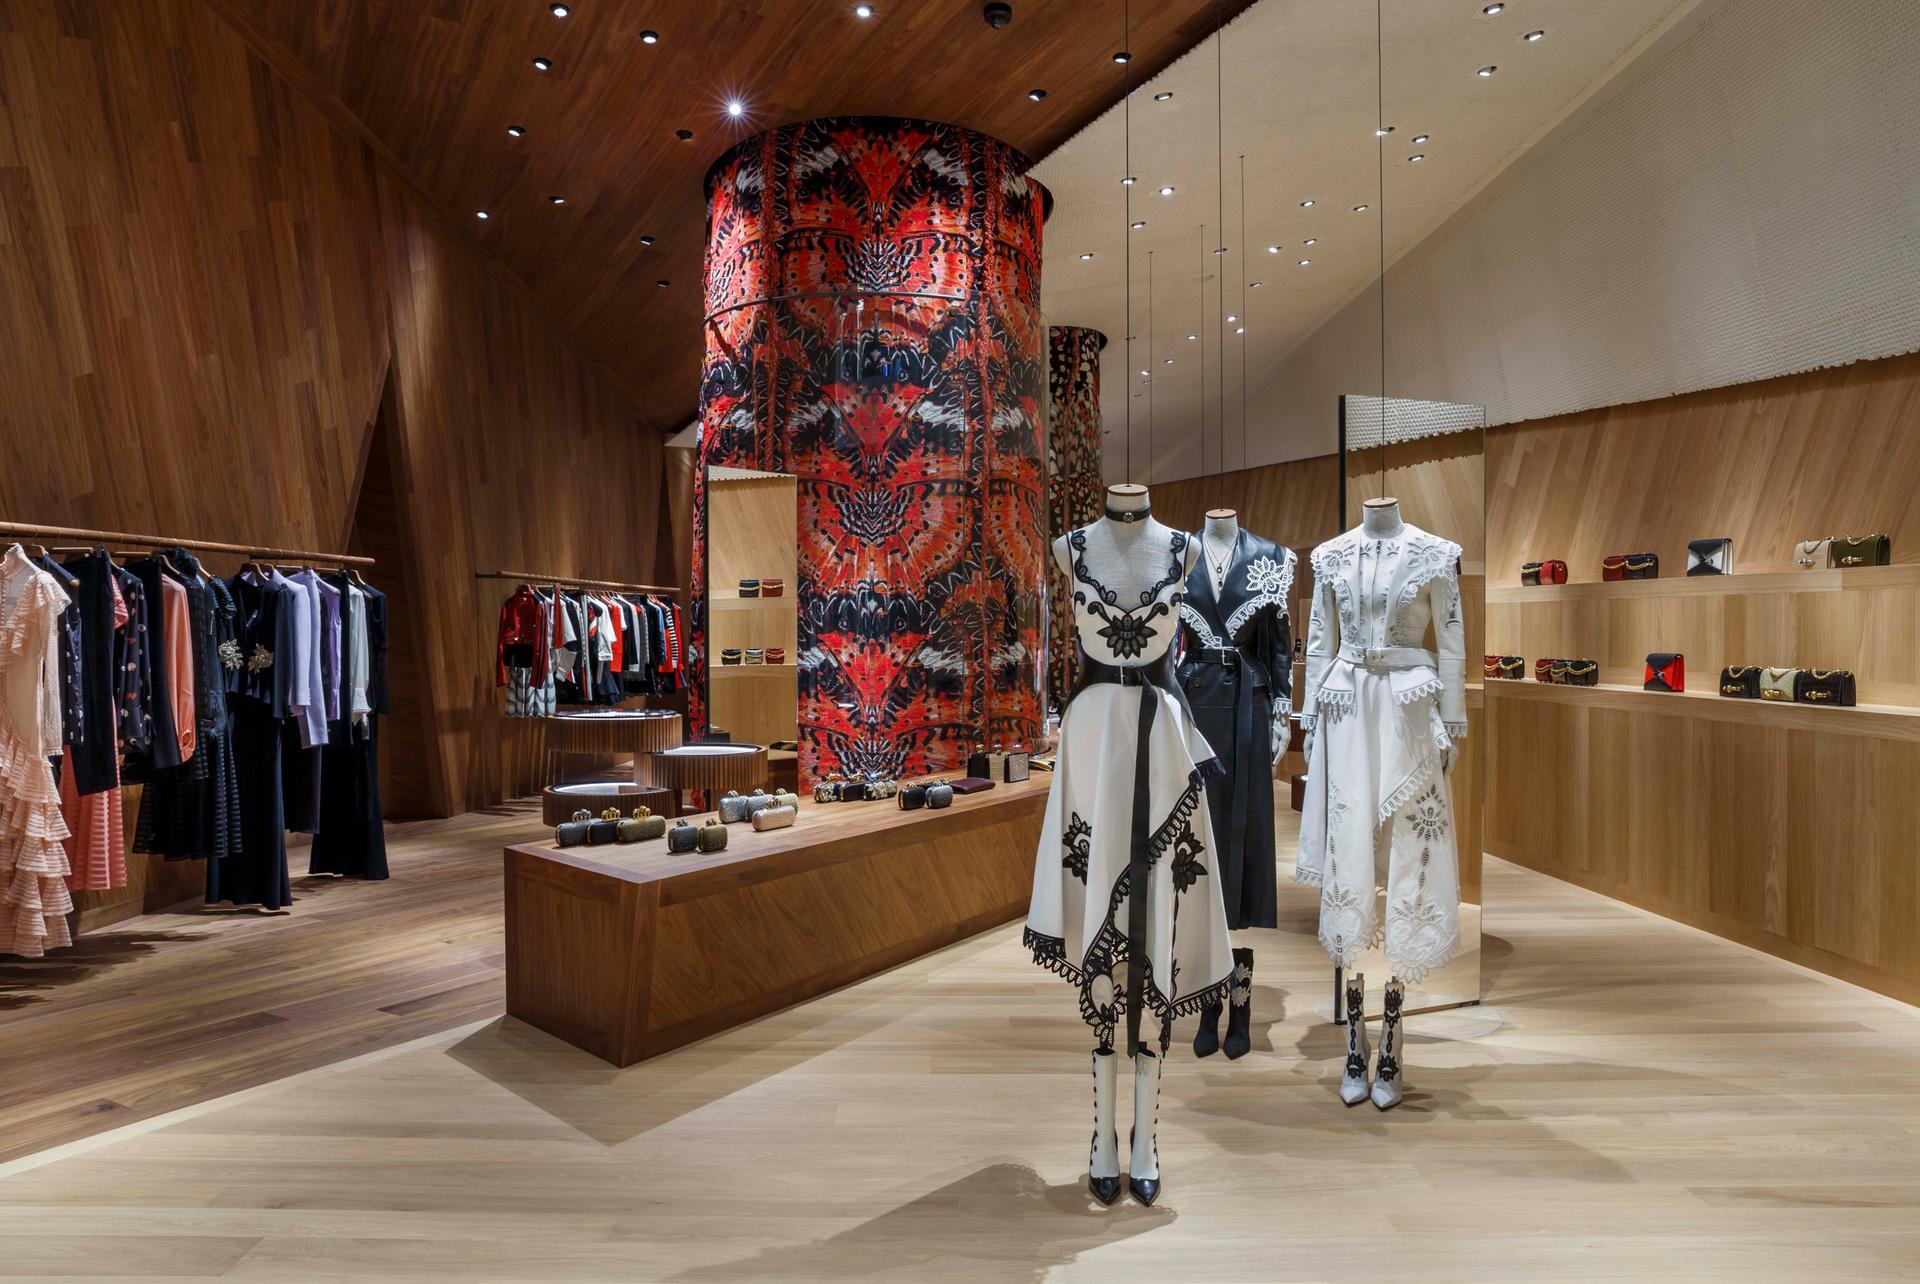 Alexander McQueen - We are pleased to announce the re-opening of our Alexander  McQueen flagship boutique on Old Bond Street, London. The new store concept  was conceived by Sarah Burton and Alexander